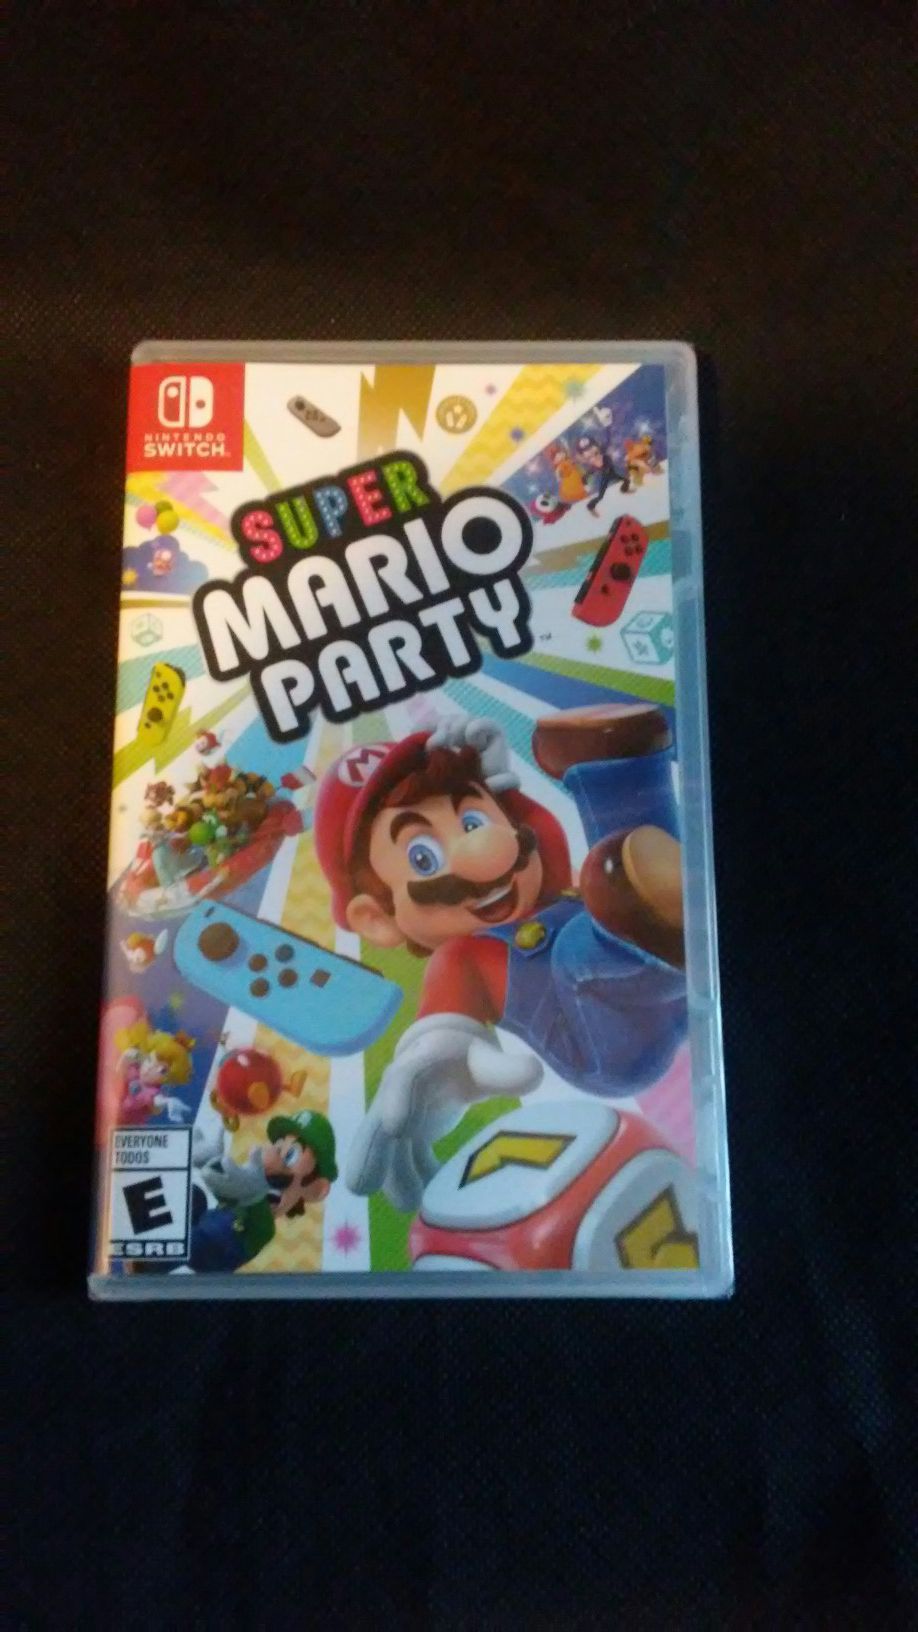 Super Mario Party for Nintendo Switch (brand new and sealed)